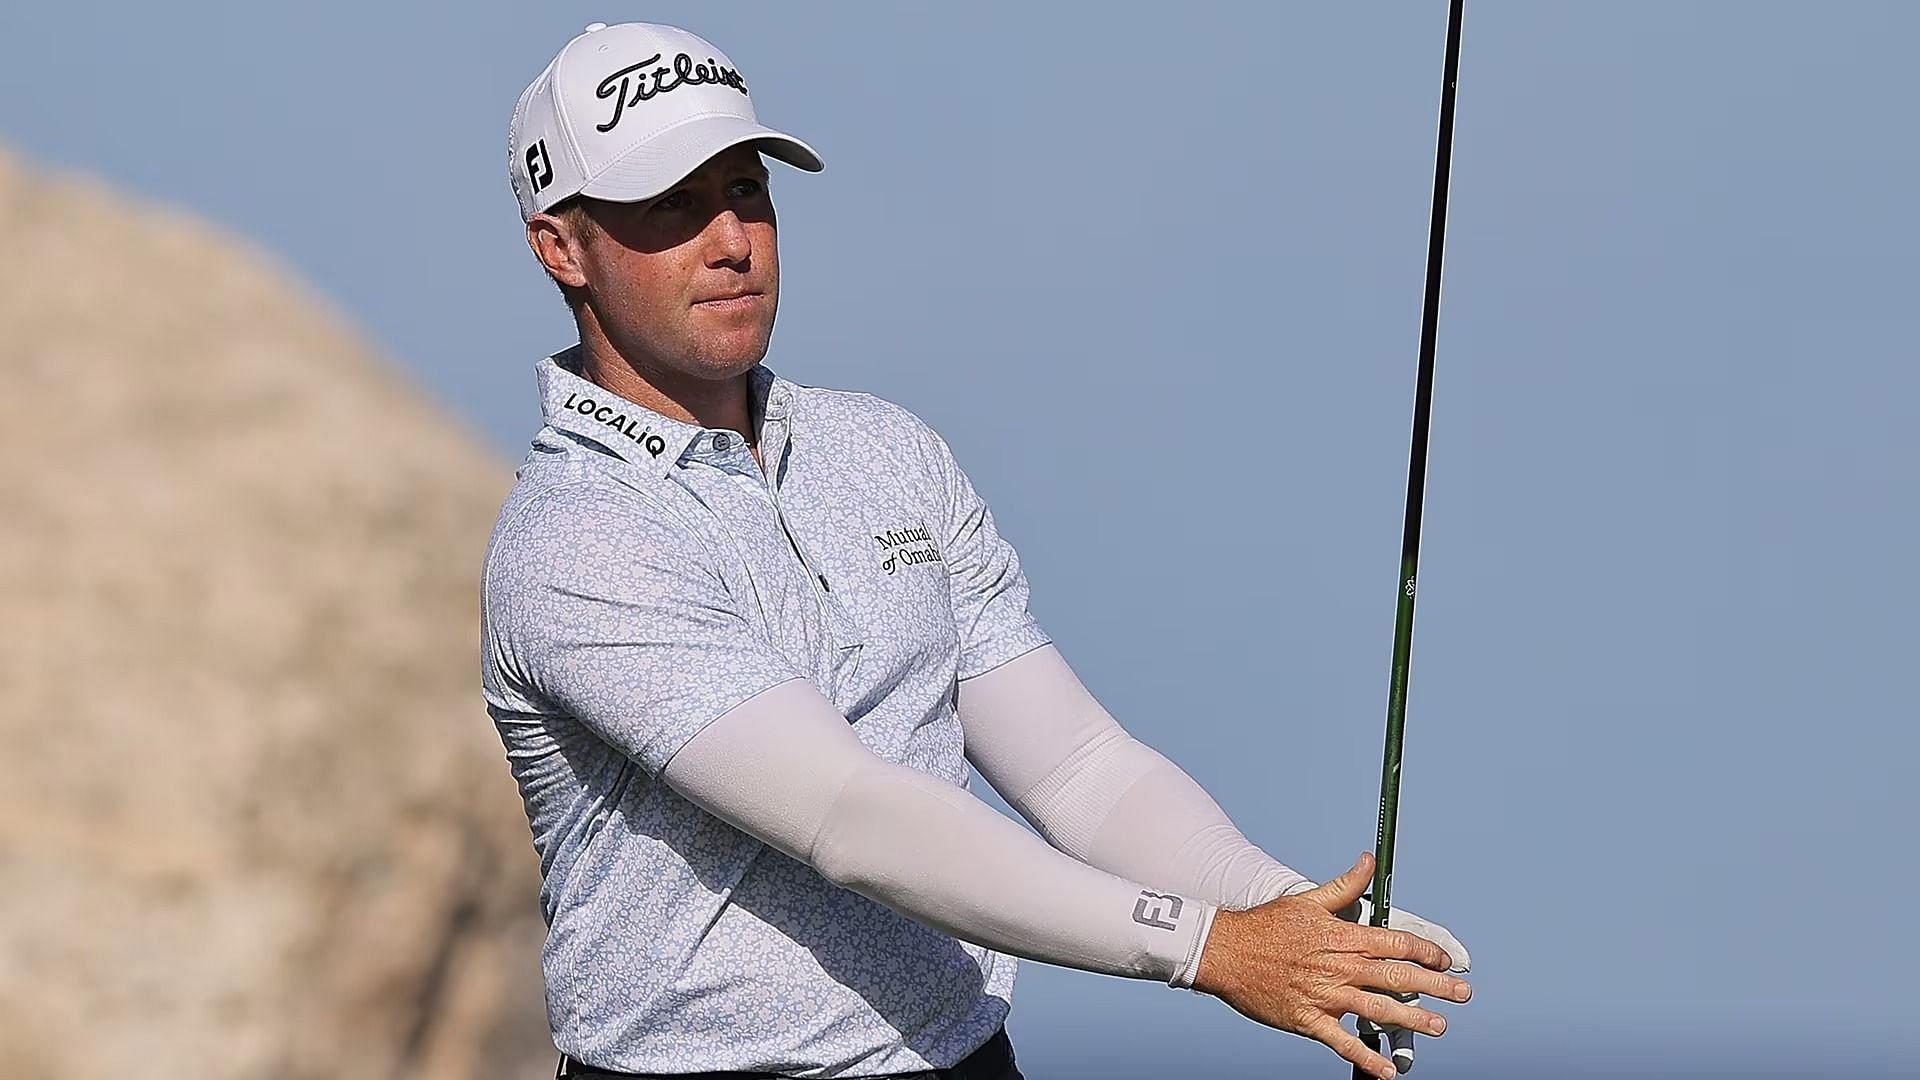 Tyler Duncan posted a 7-under 65 at Corales Puntacana Championship on Friday